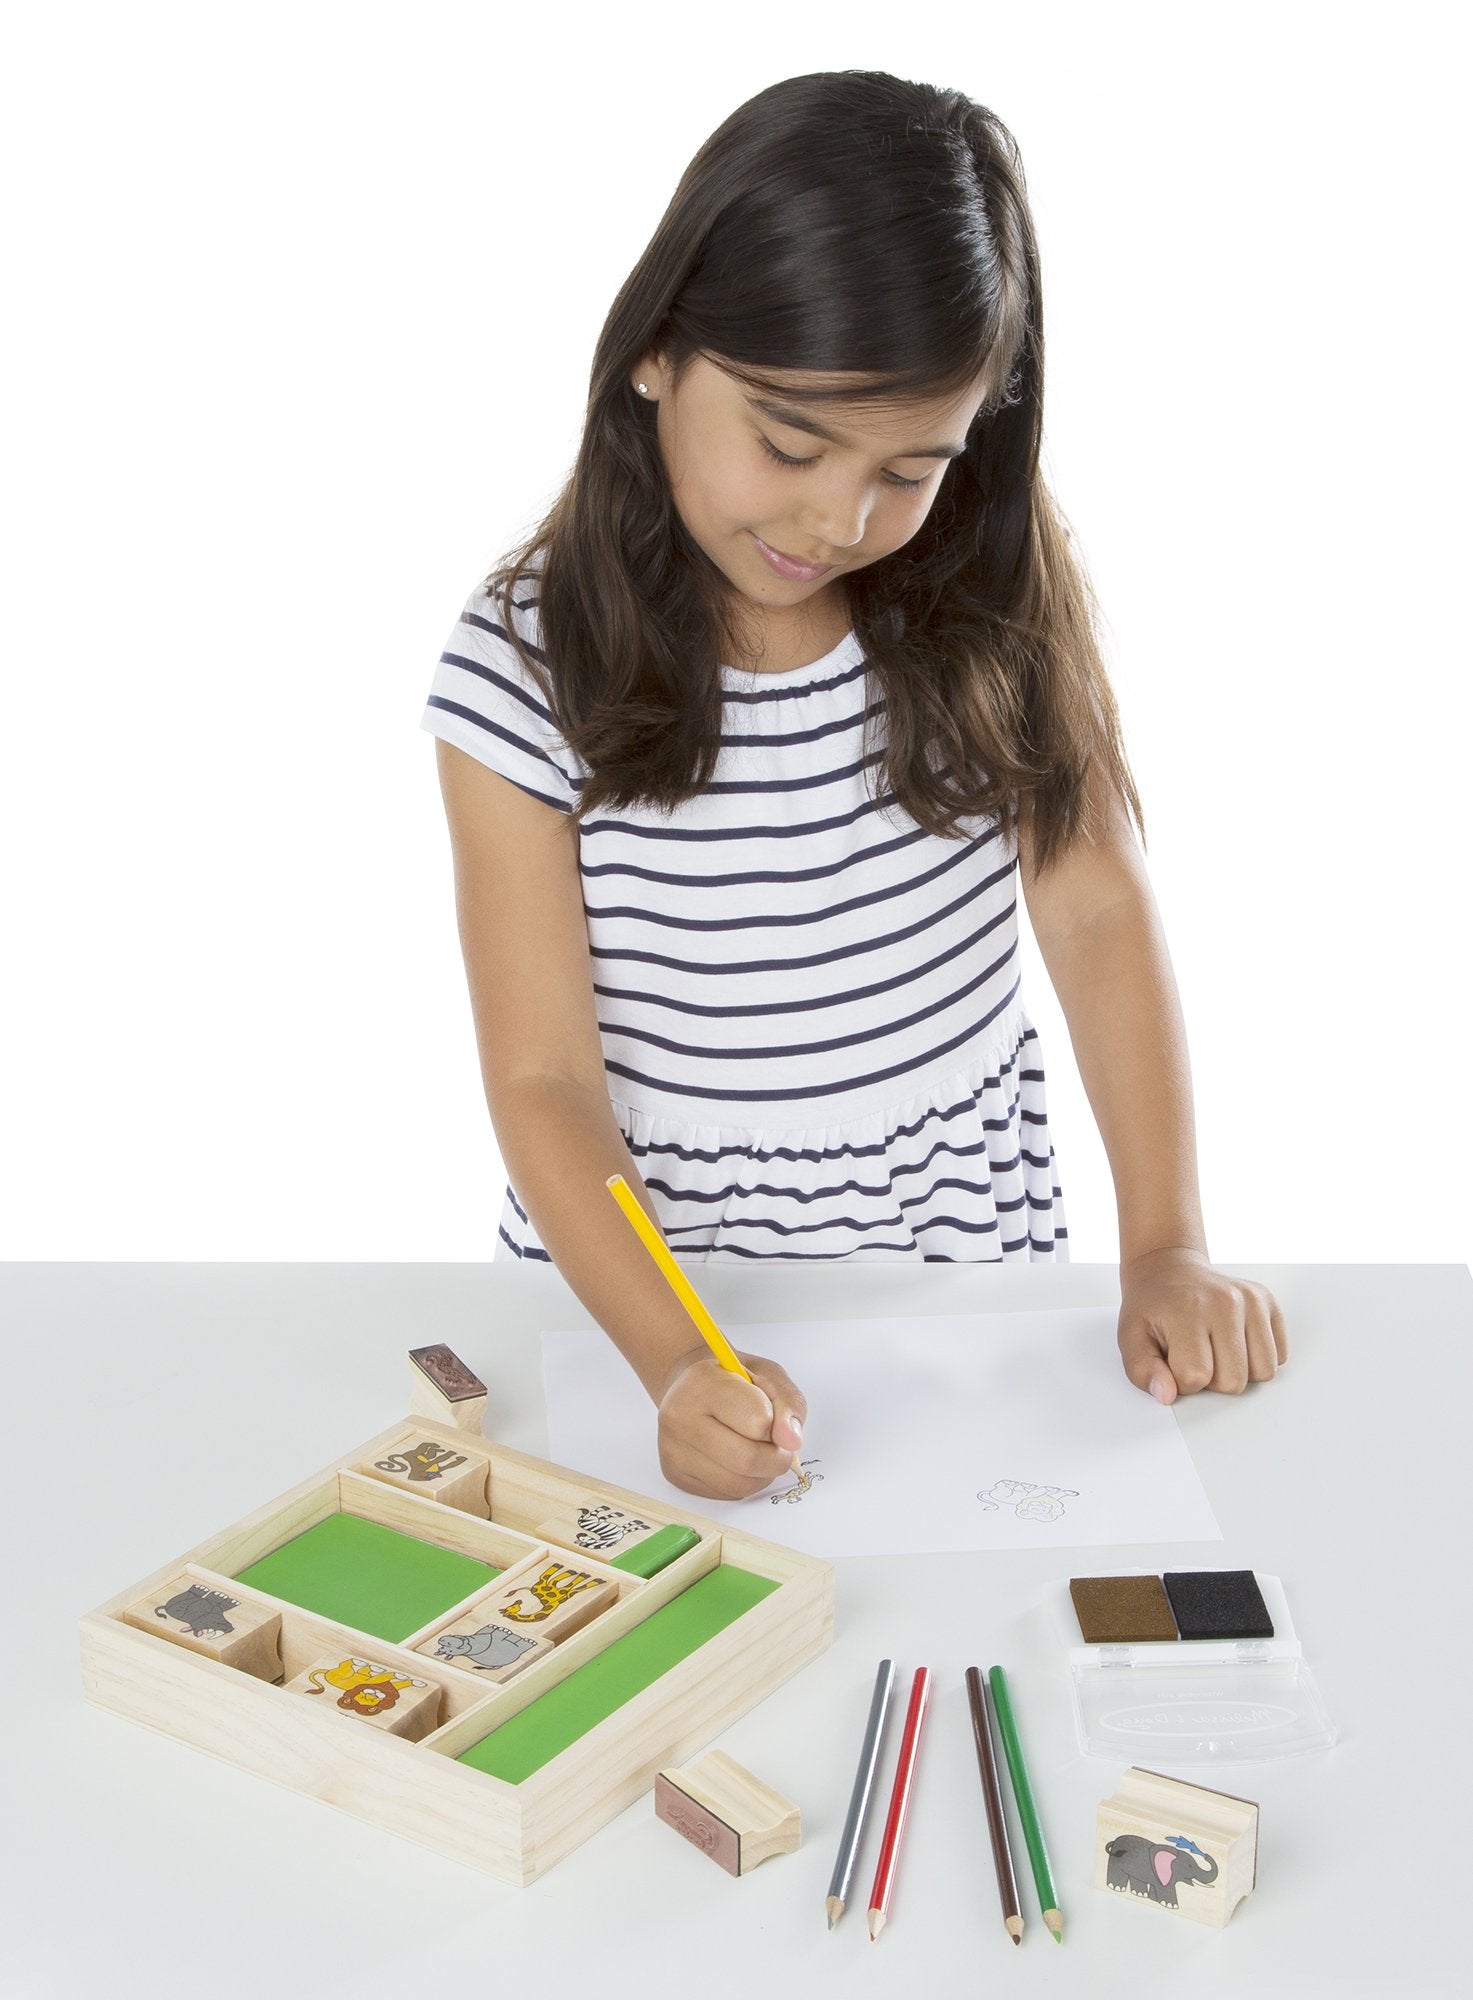 Melissa & Doug Stamp-a-Scene Stamp Pad: Fairy Garden - 20 Wooden Stamps, 5  Colored Pencils, and 2-Color Stamp Pad